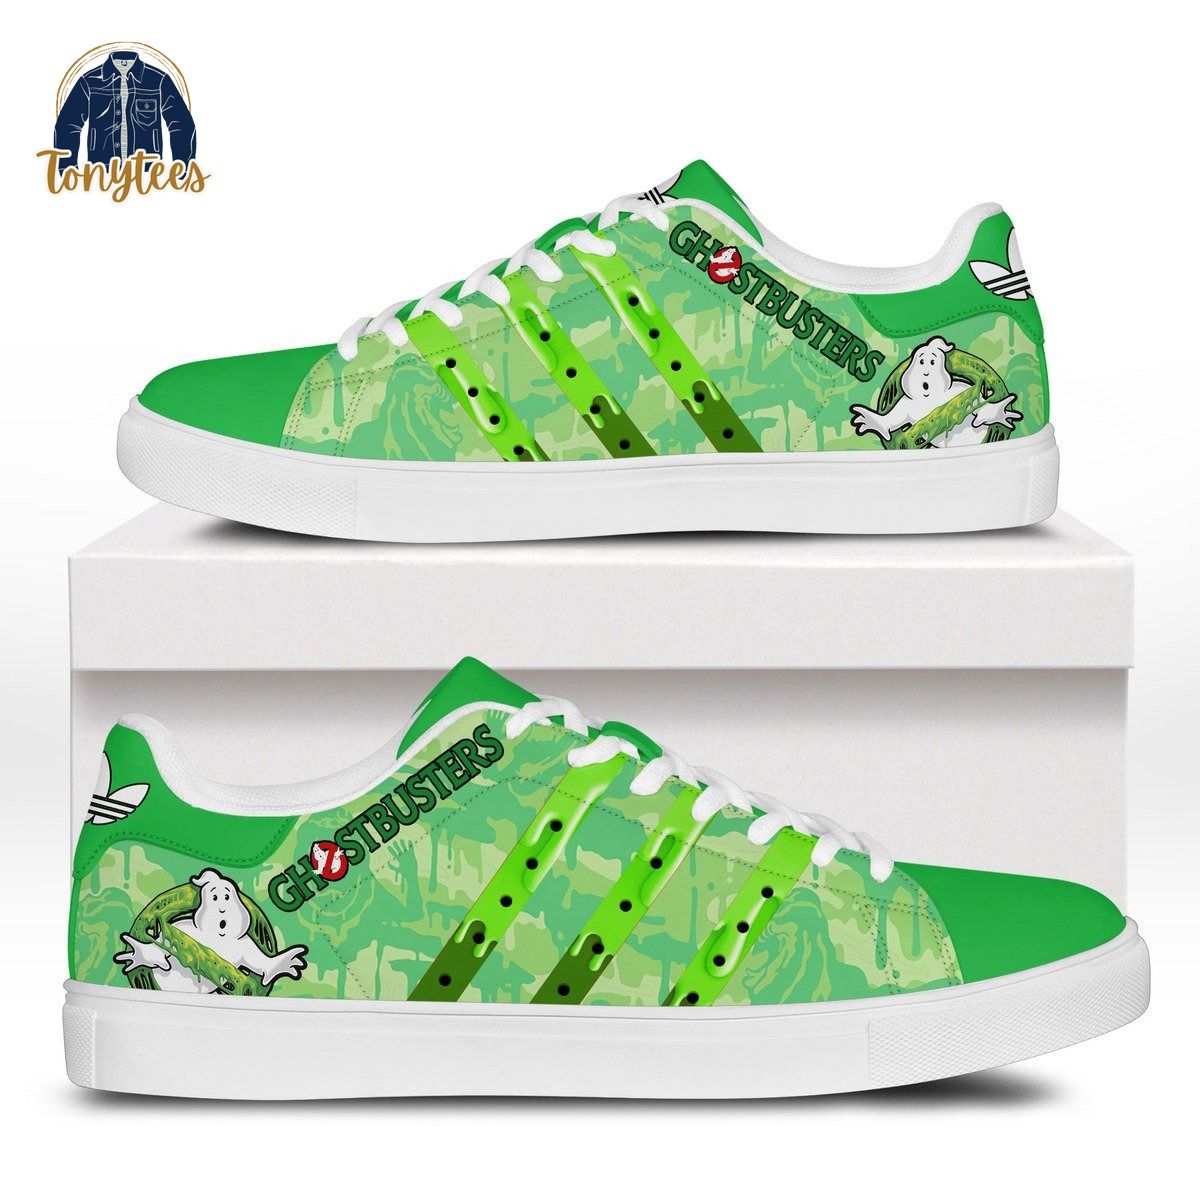 Ghostbusters adidas stan smith shoes